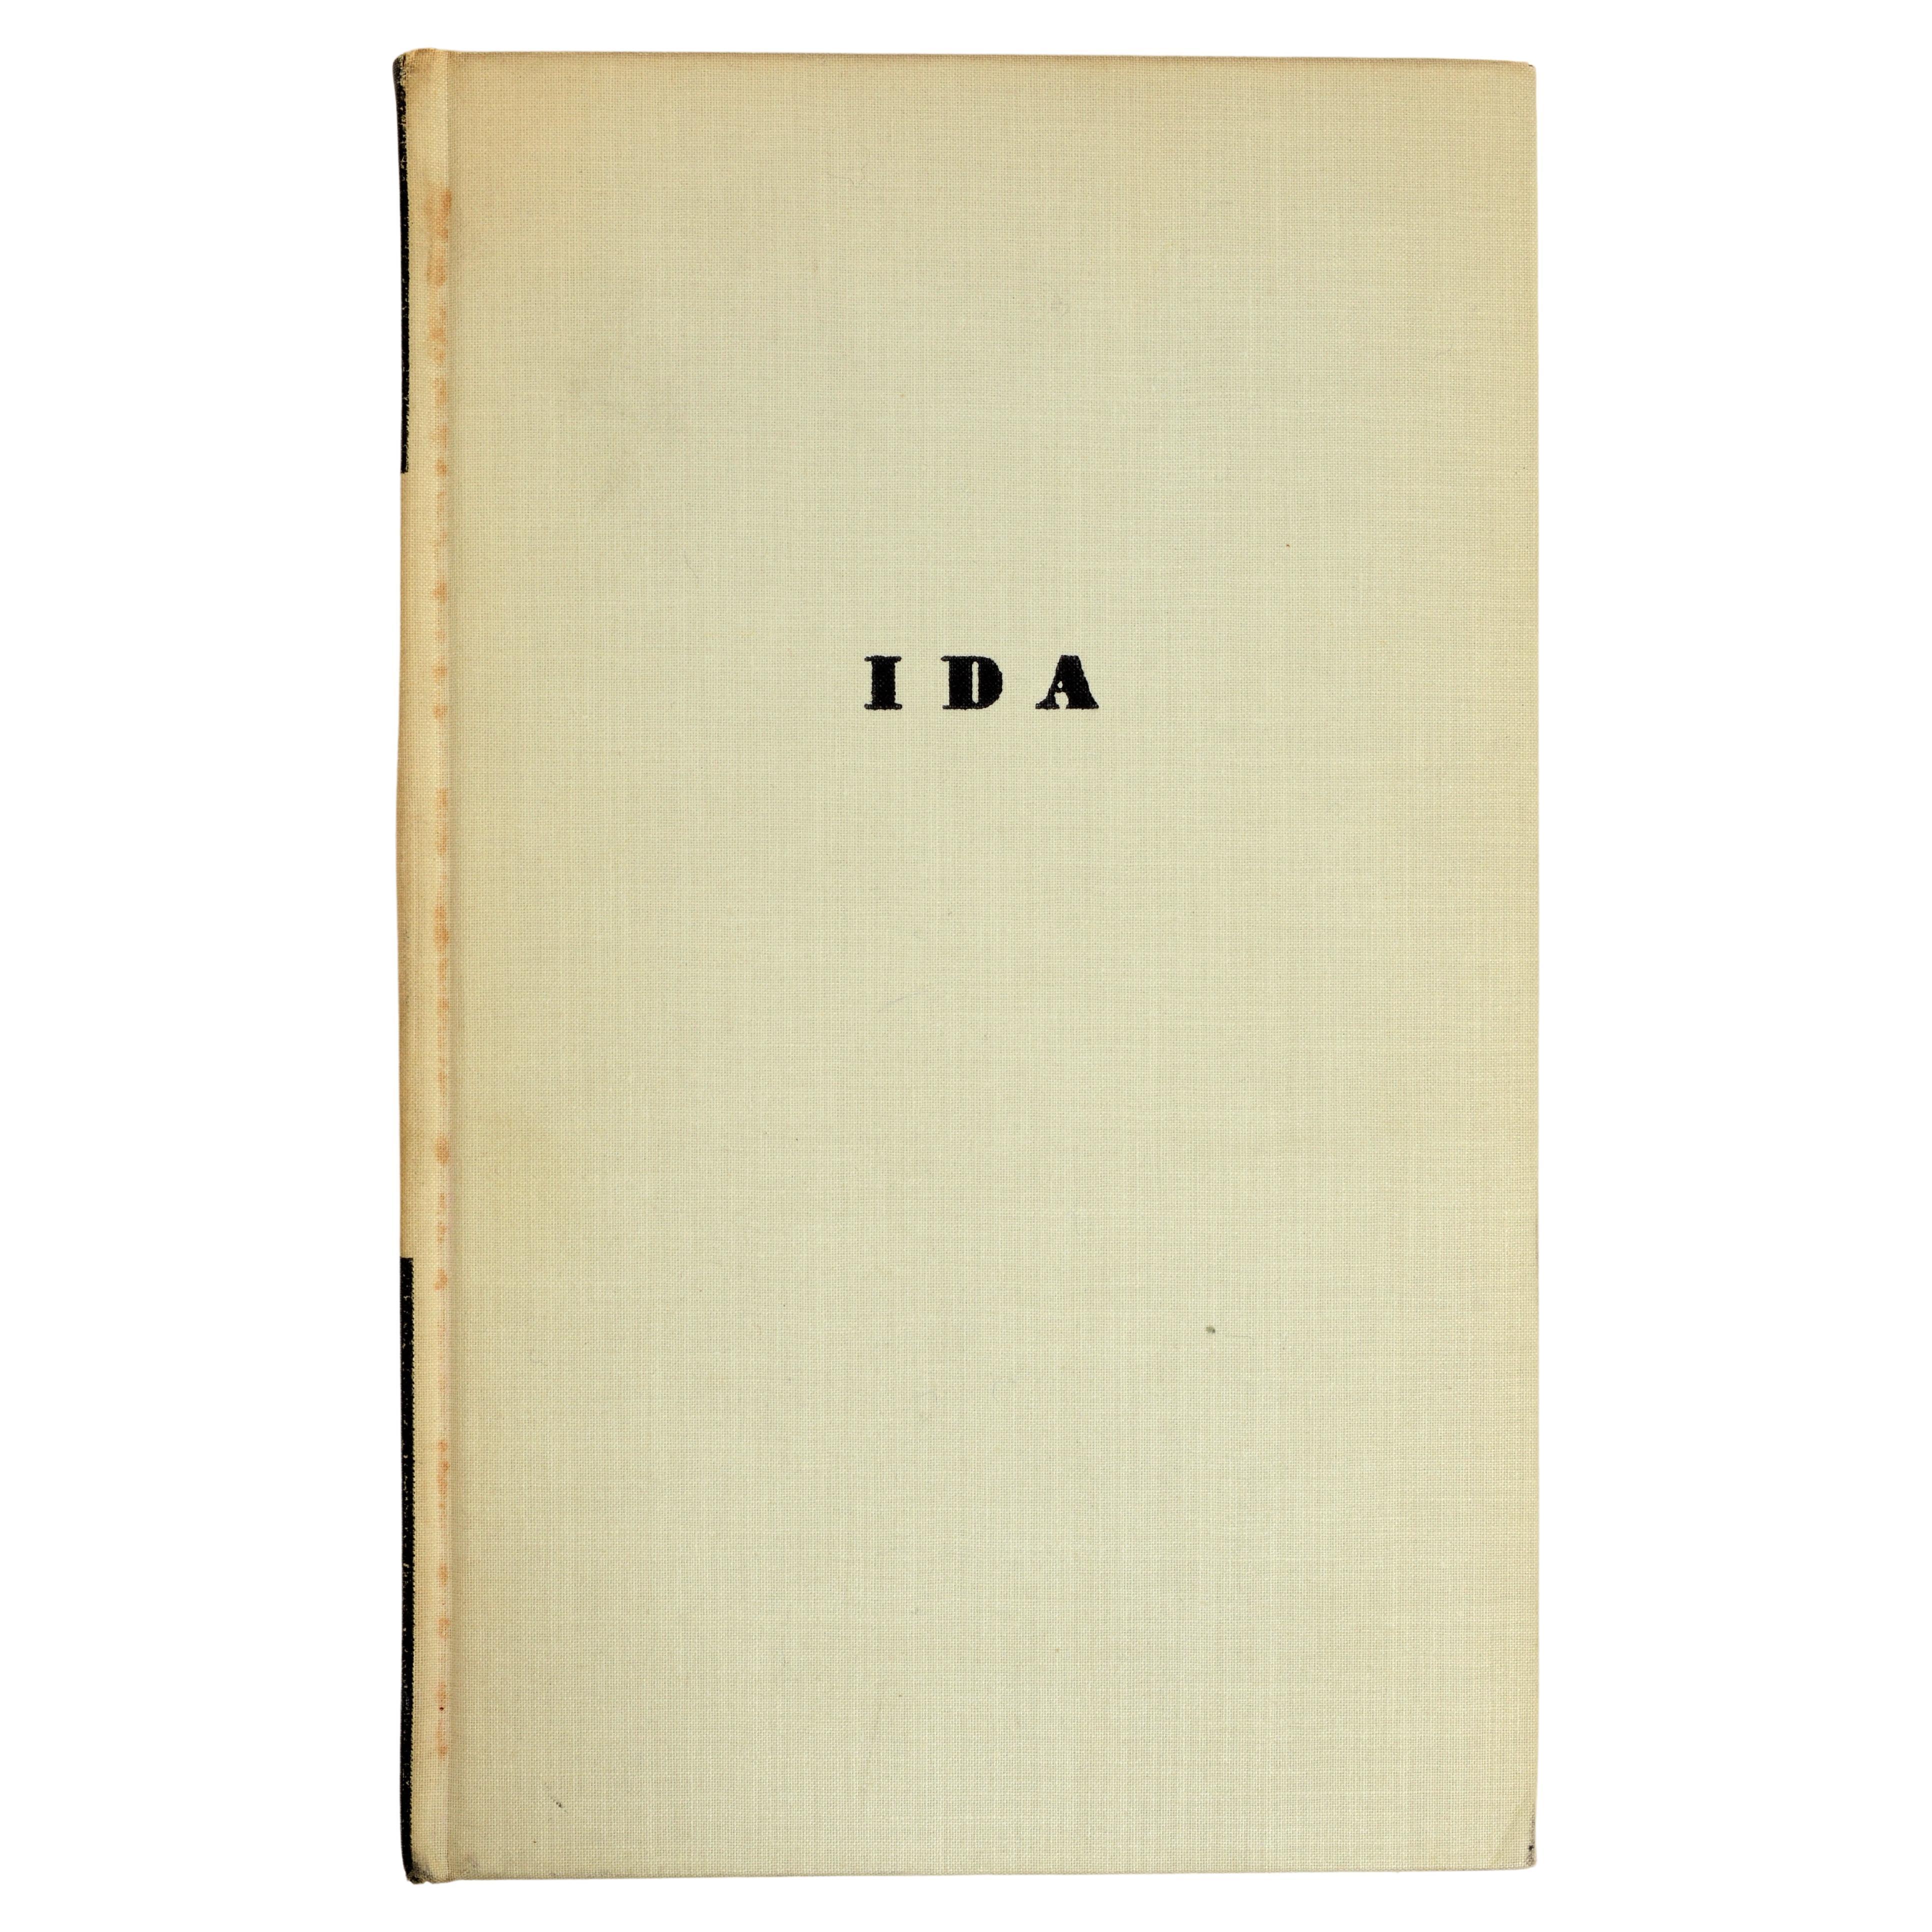 Ida, A Novel by Gertrude Stein, Stated 1st Ed For Sale